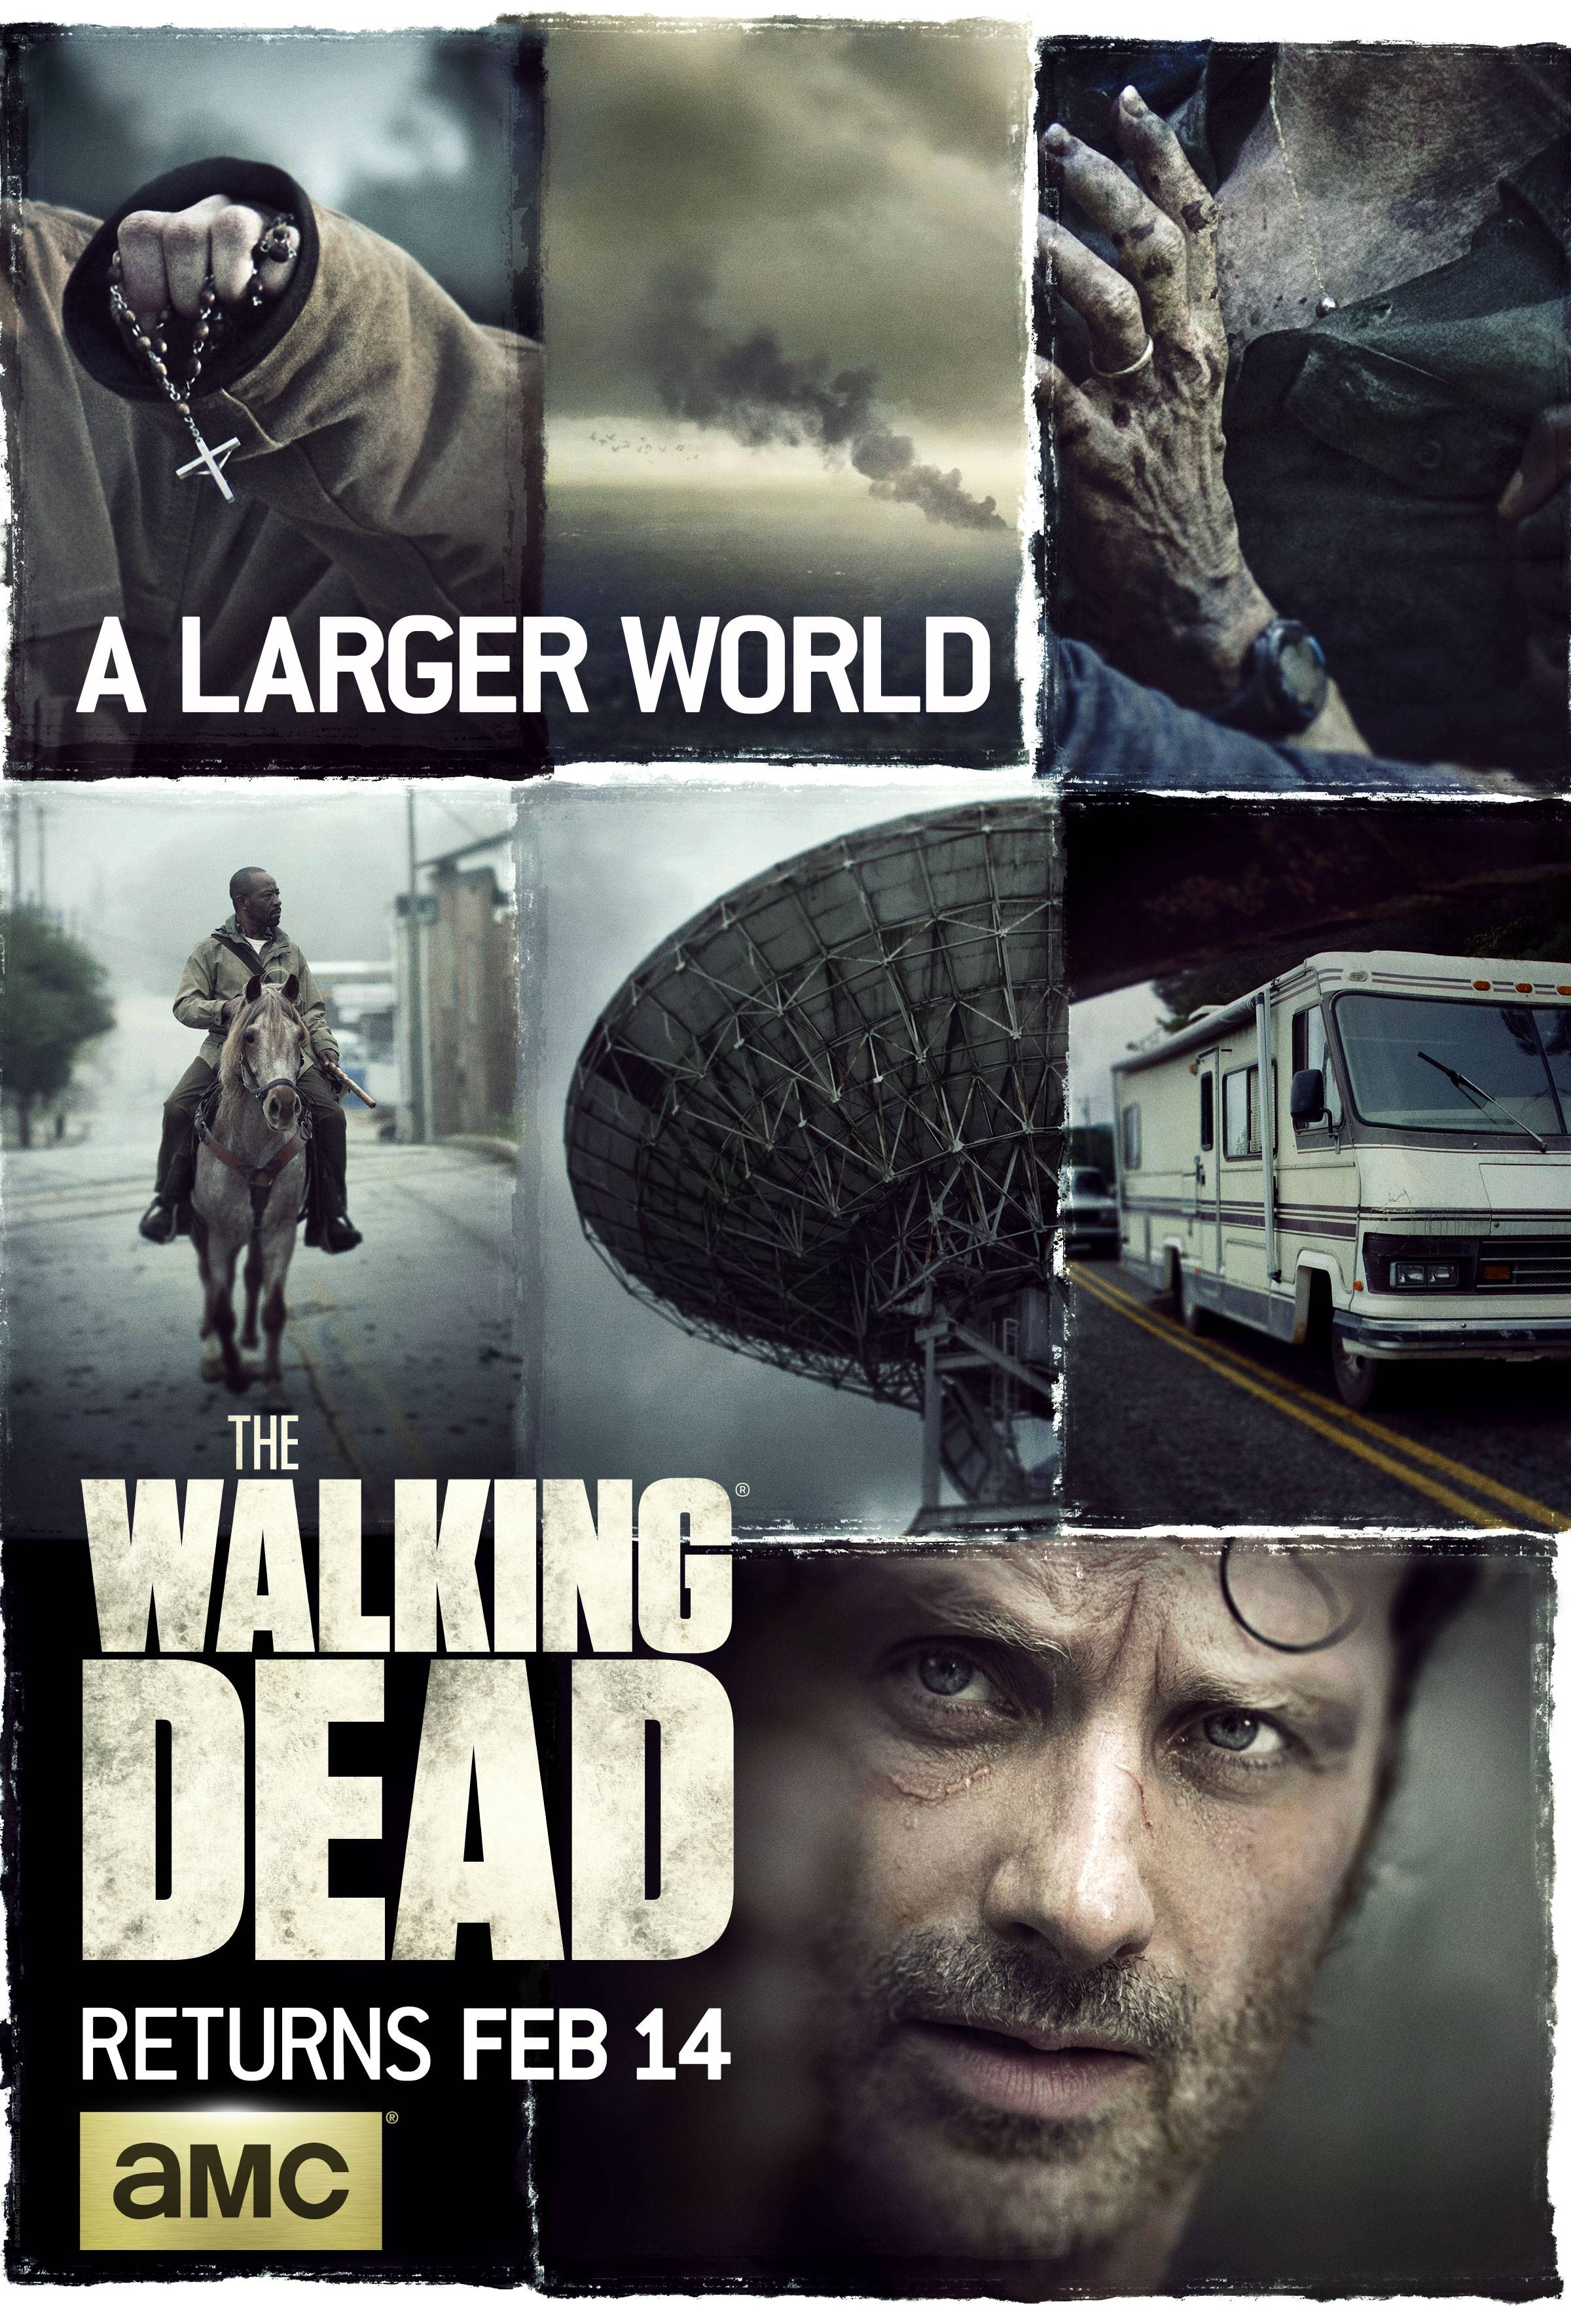 New The Walking Dead Season 6 Poster Promises a Larger World